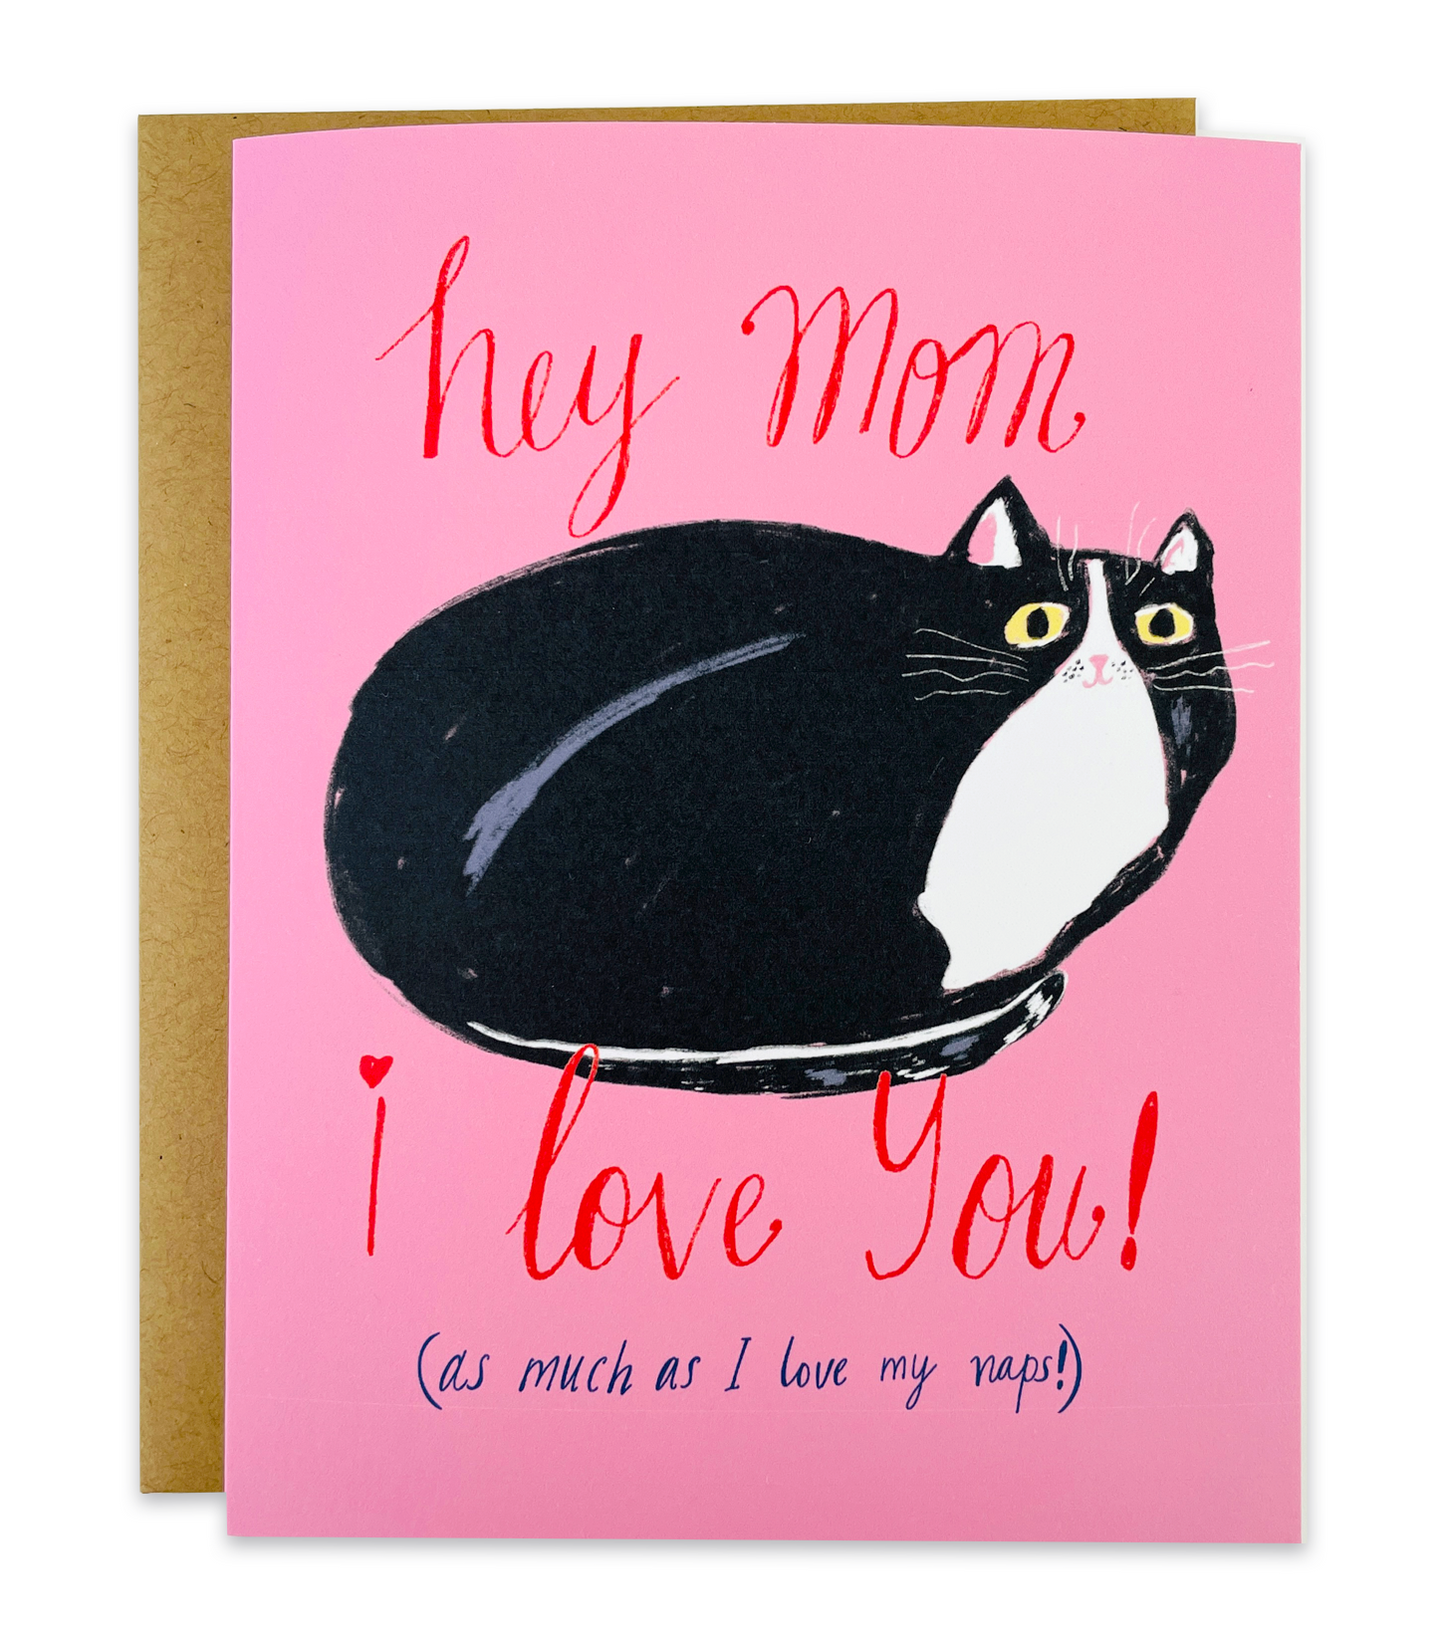 Tell mom you love her purr-fectly